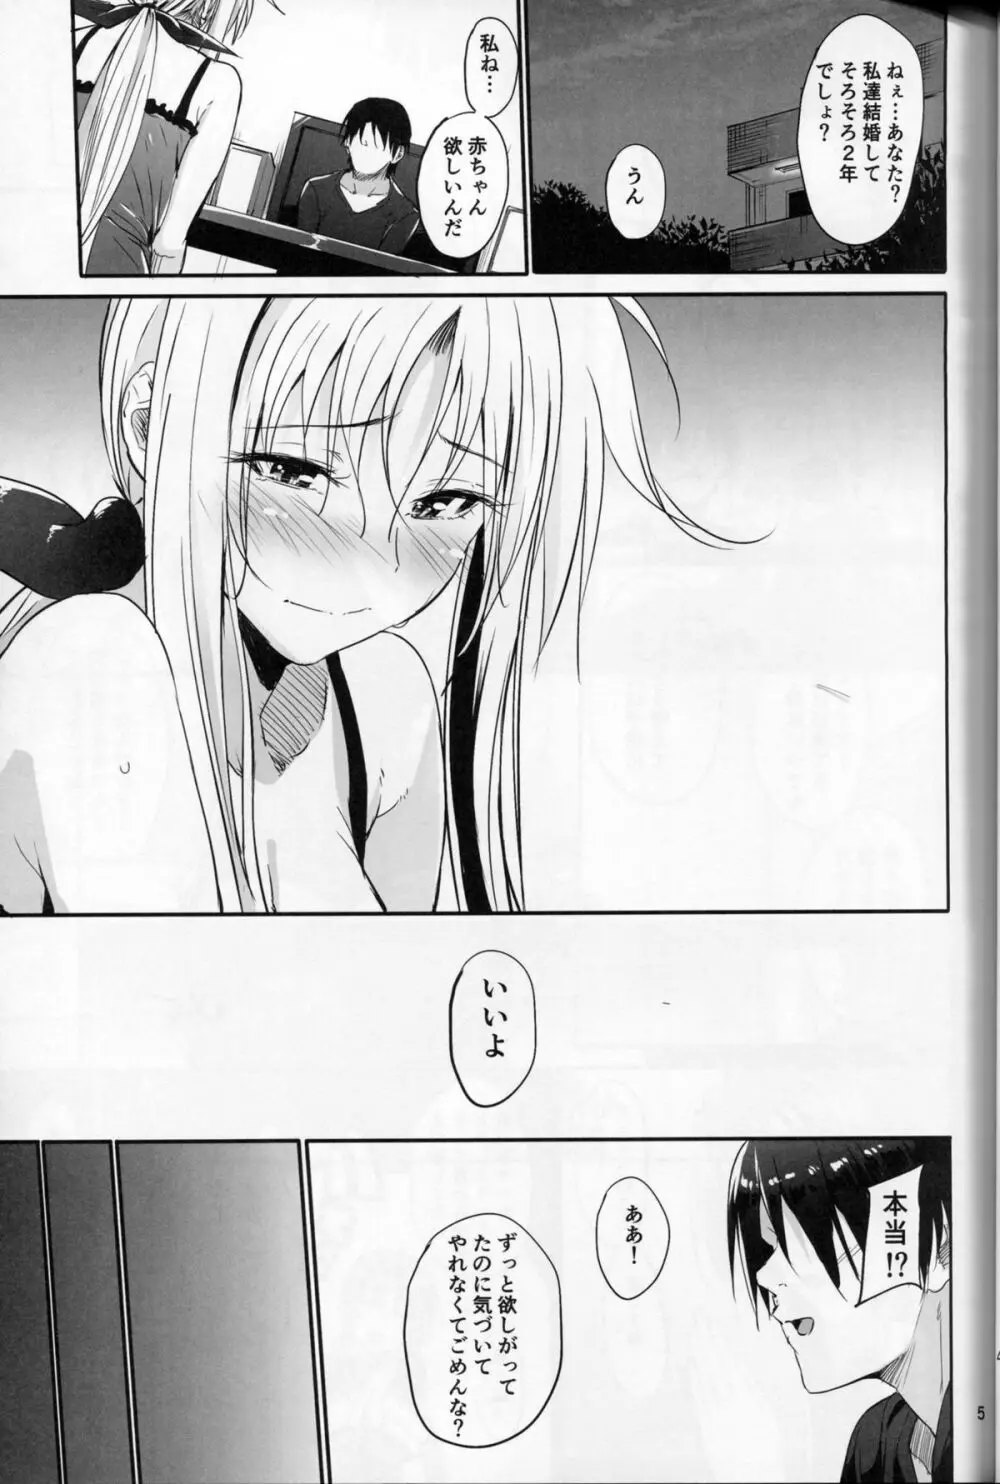 Home Sweet Home ～フェイト編 6～ - page4